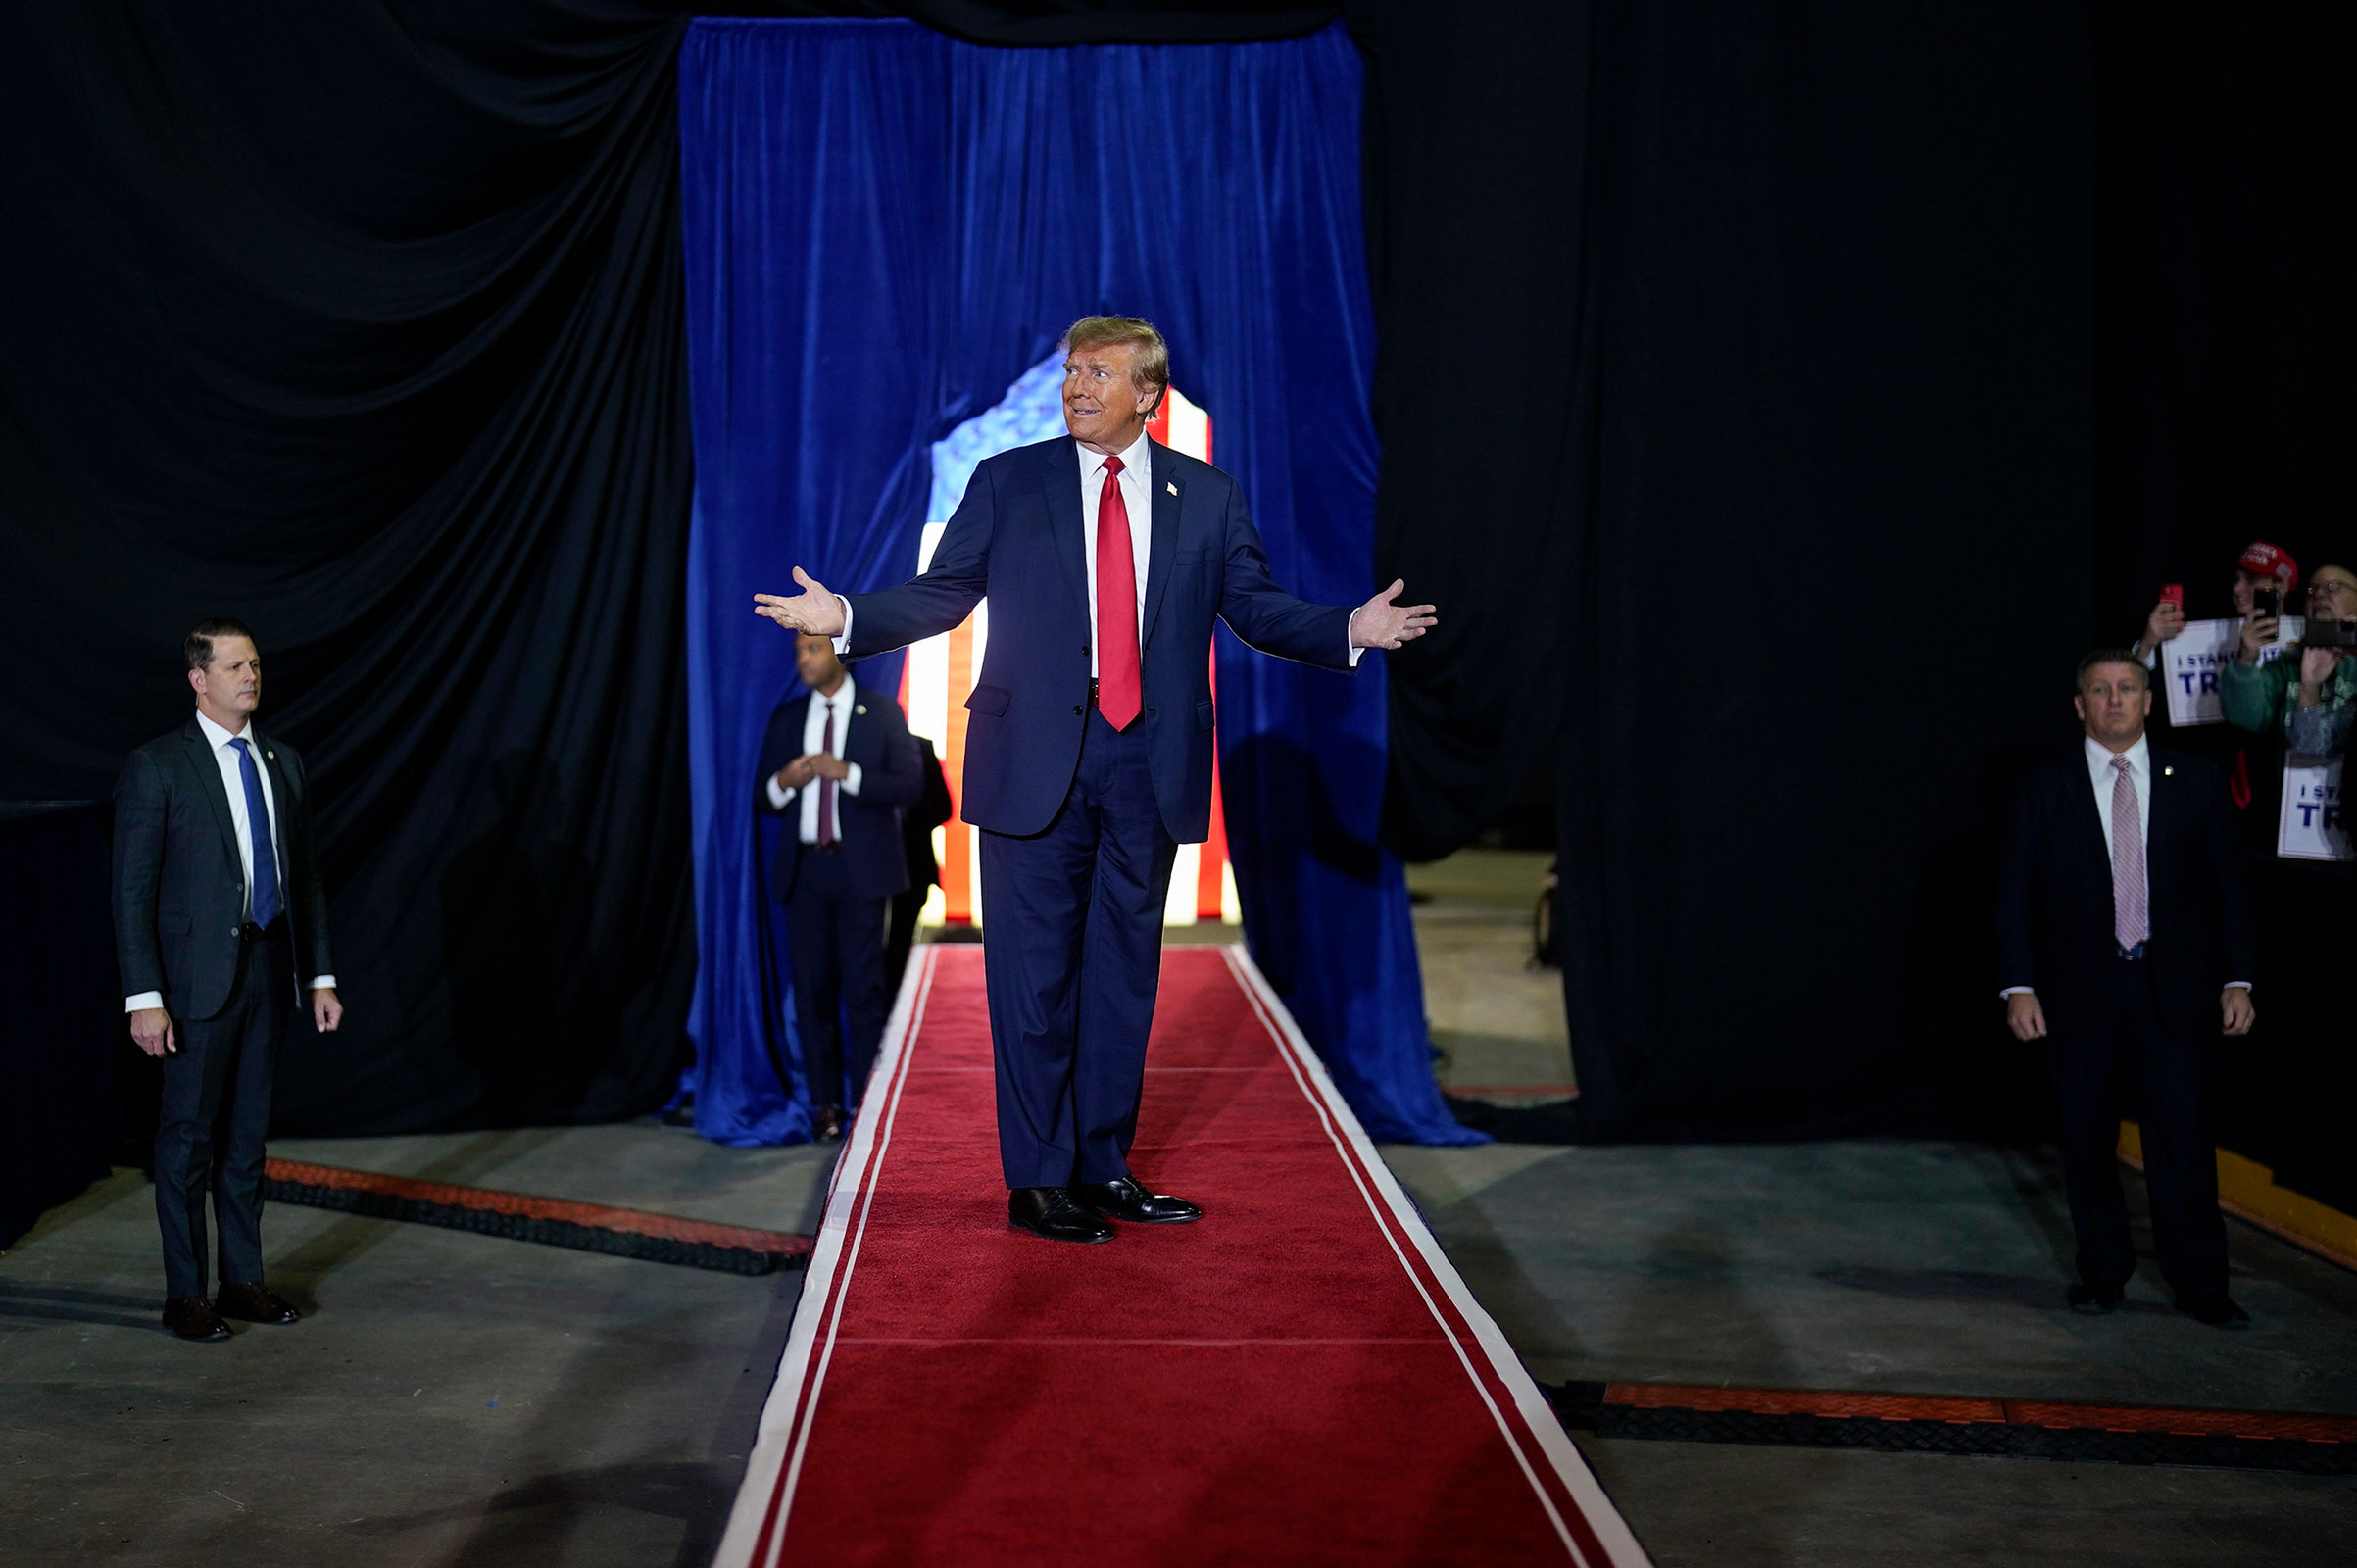 Former president Donald Trump steps out to deliver remarks at a campaign rally at the SNHU Arena in Manchester, New Hampshire, on January 20.